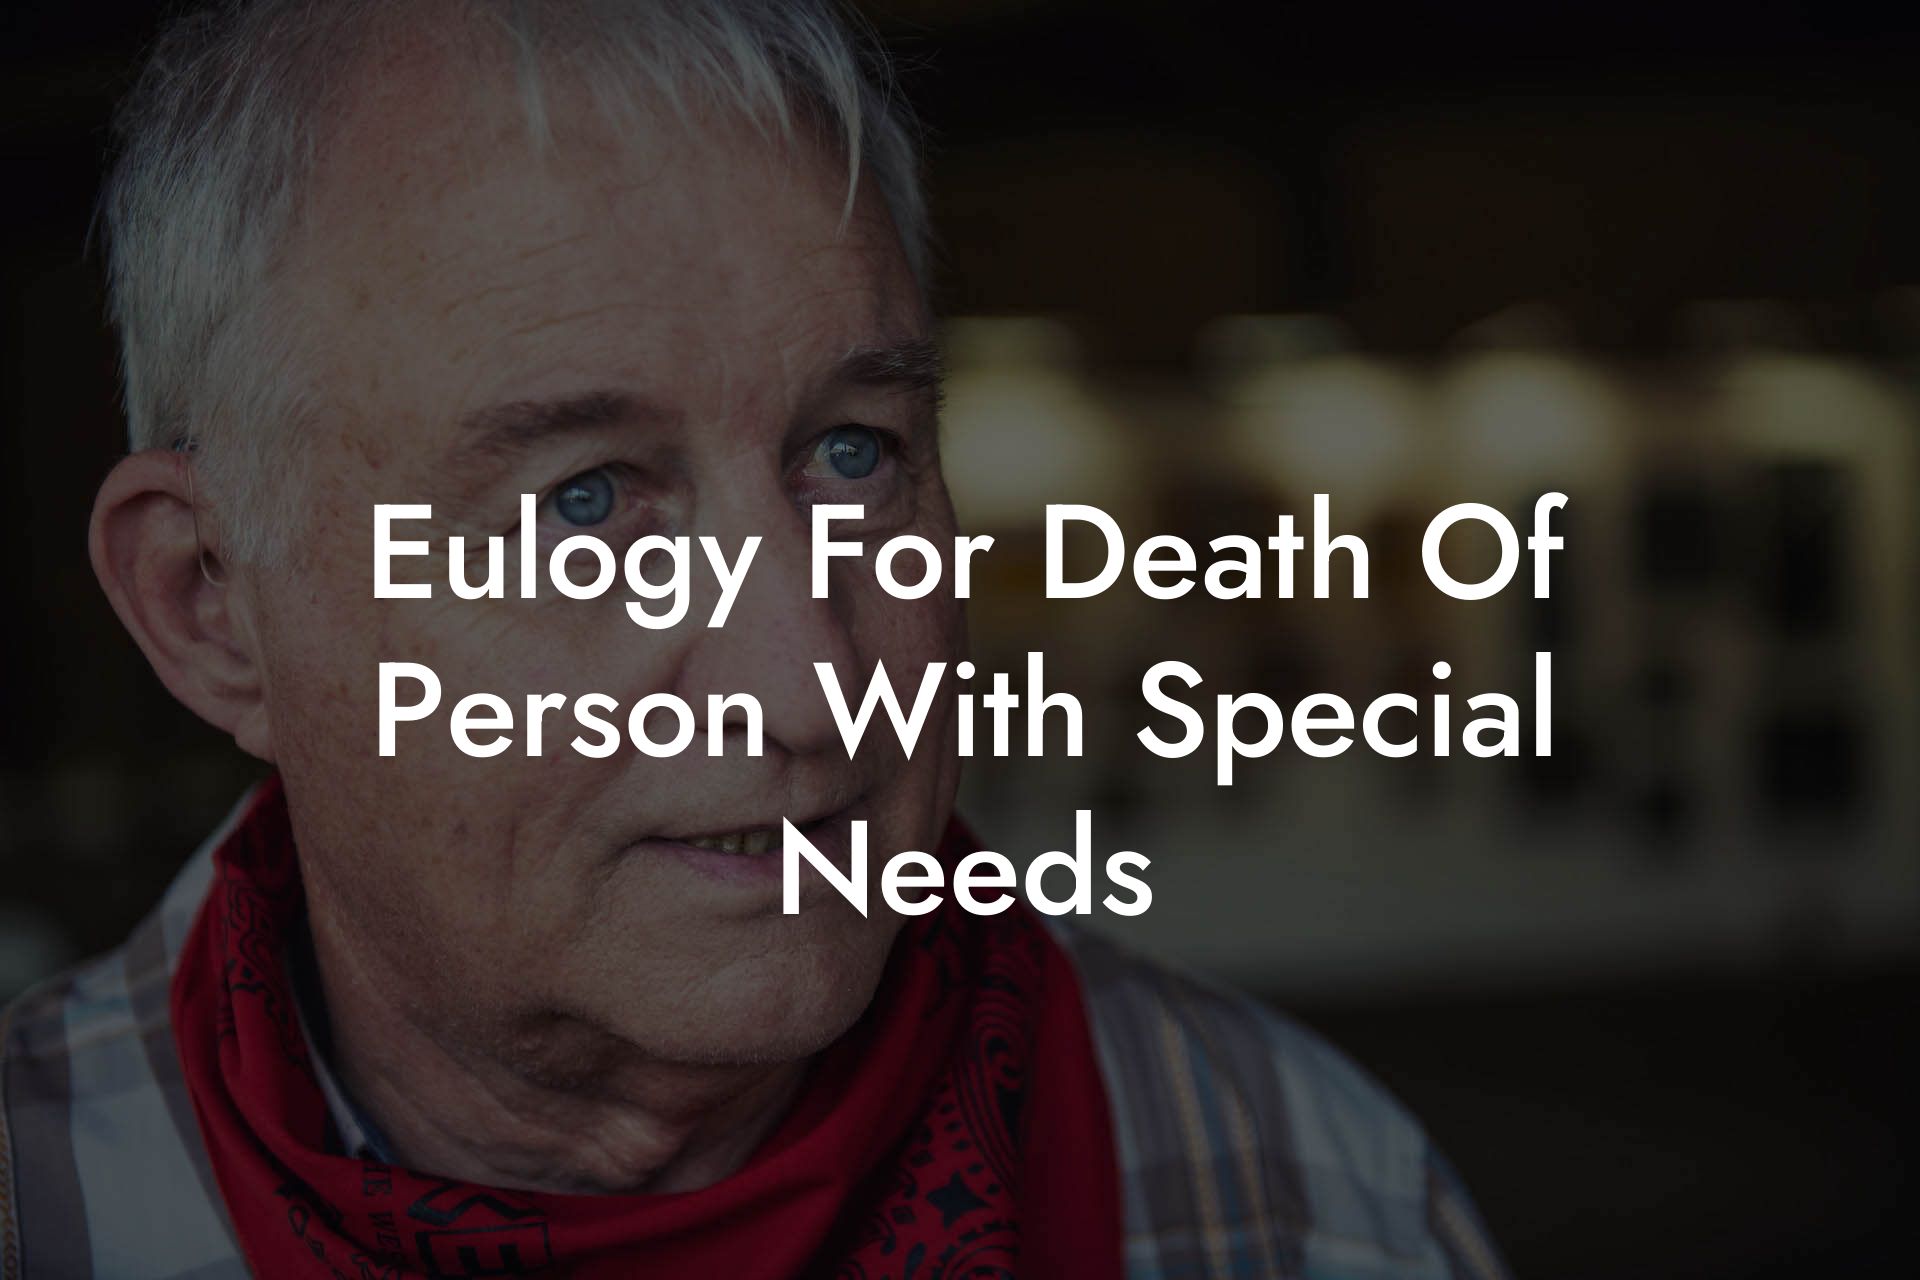 Eulogy For Death Of Person With Special Needs